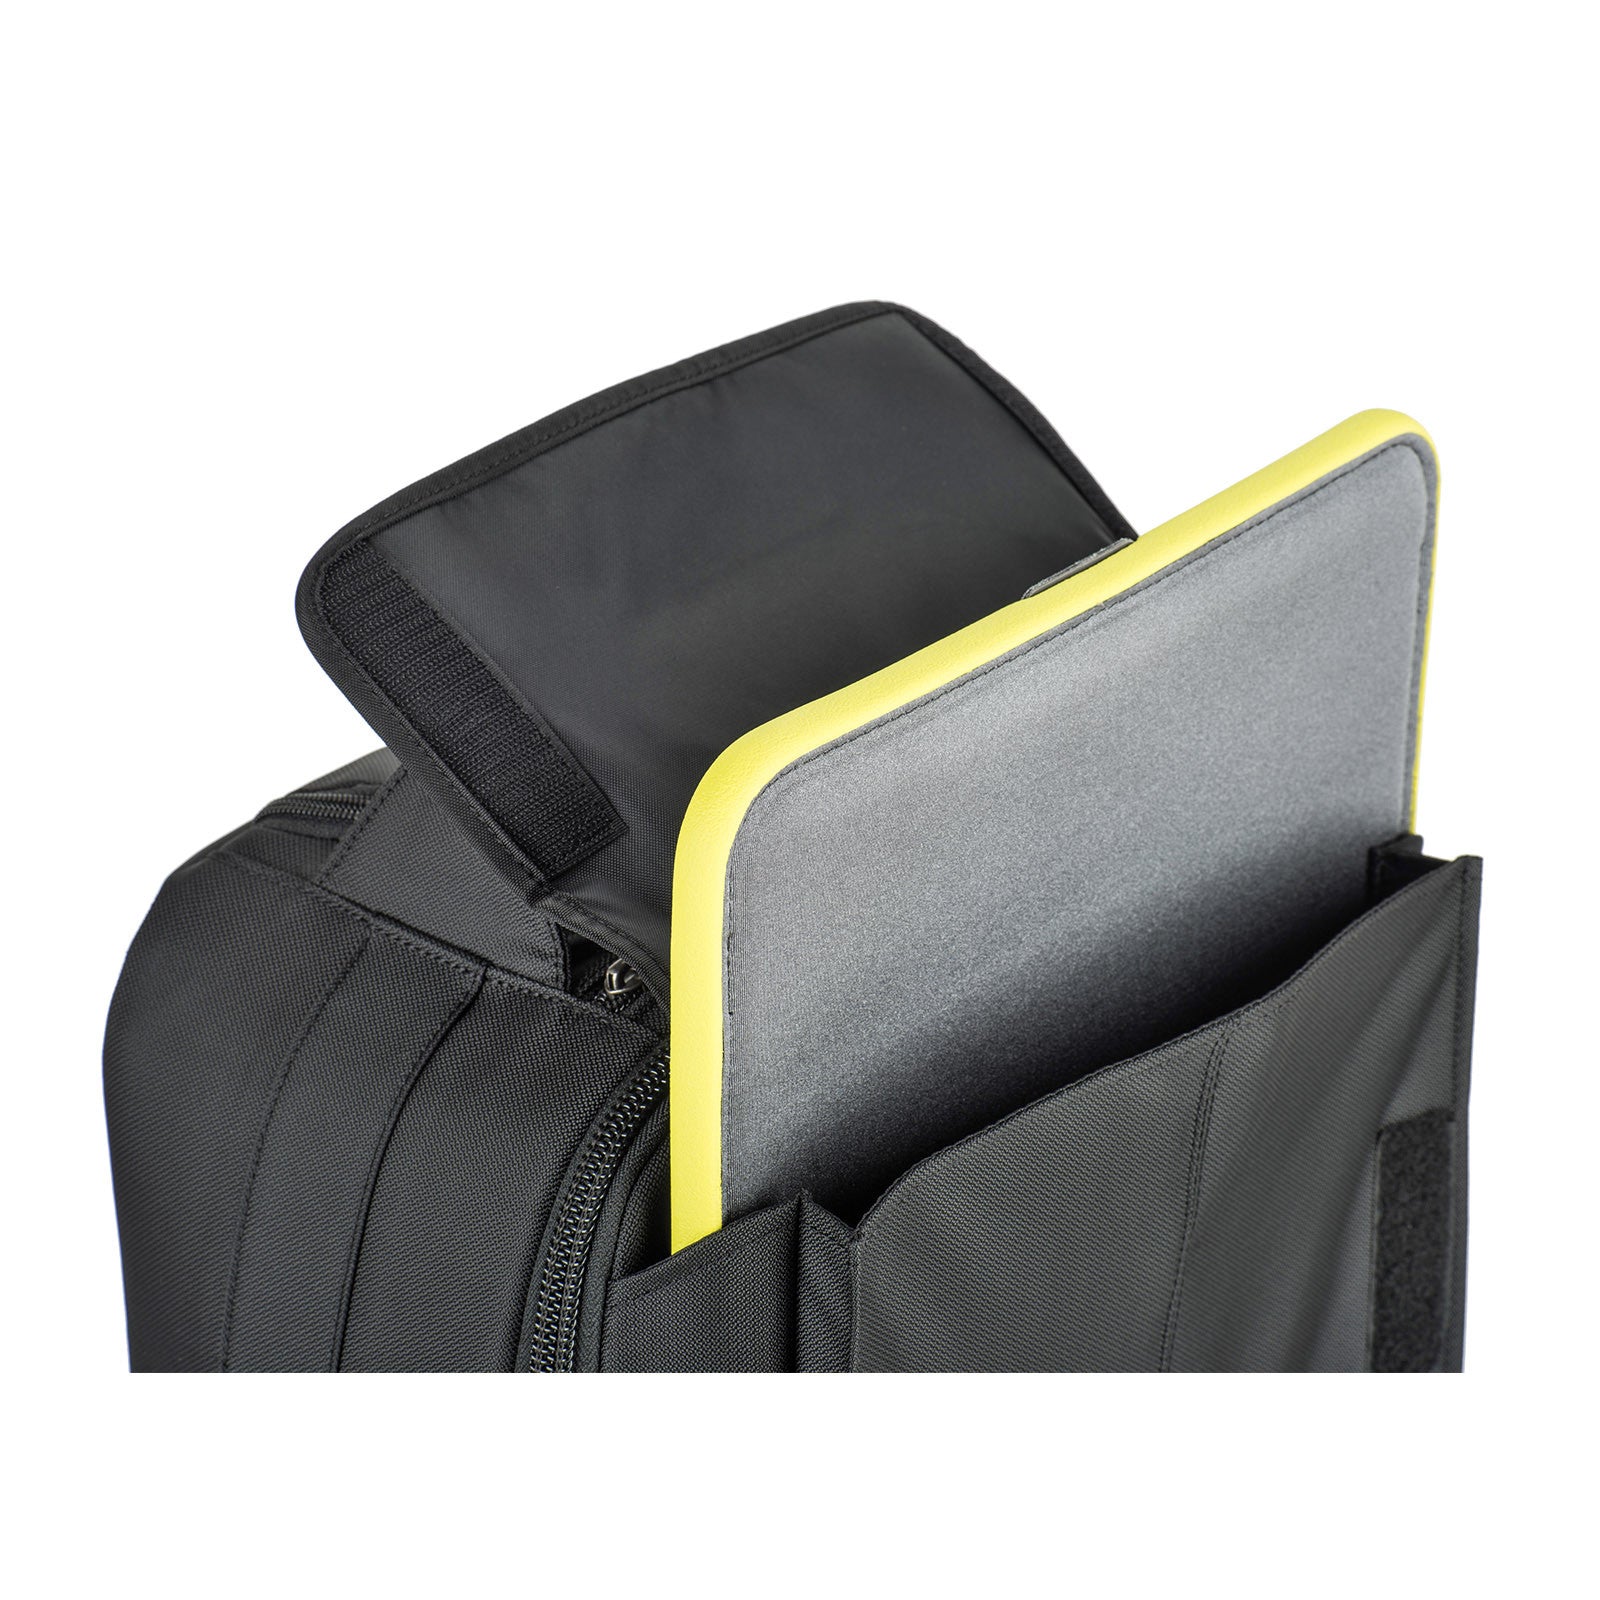 Dedicated laptop pocket fits up to a 15” laptop in a padded sleeve